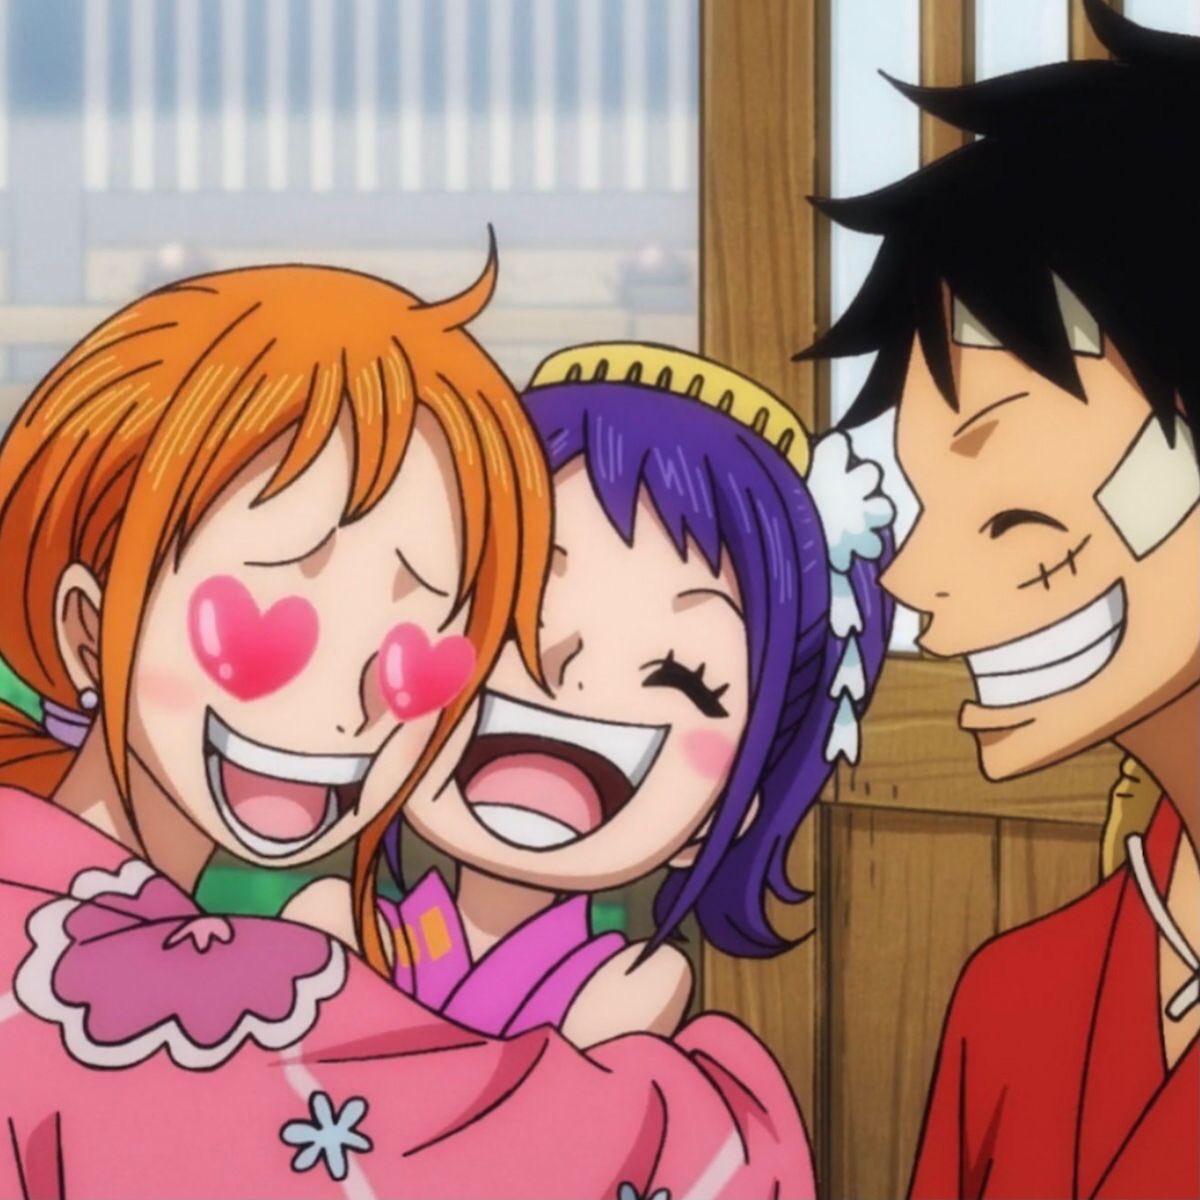 Luffy and Nami will be such beautiful loving parents in the future.  ❤️🧡 #Lunami #ONEPIECE #Luffy #Nami #LuNa